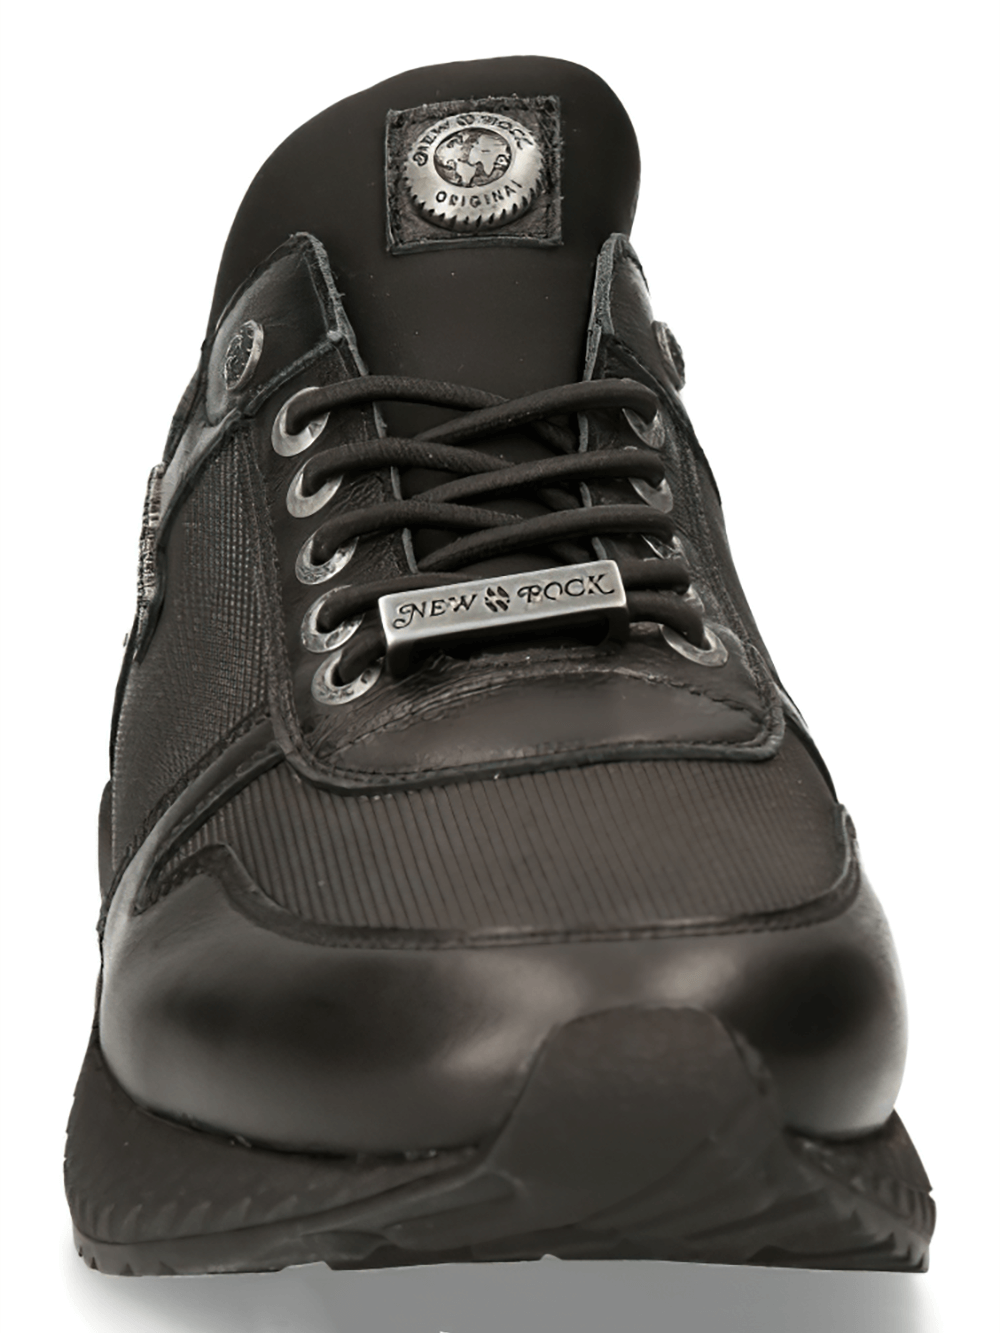 NEW ROCK Urban Lace-Up Genuine Leather Sports Shoes